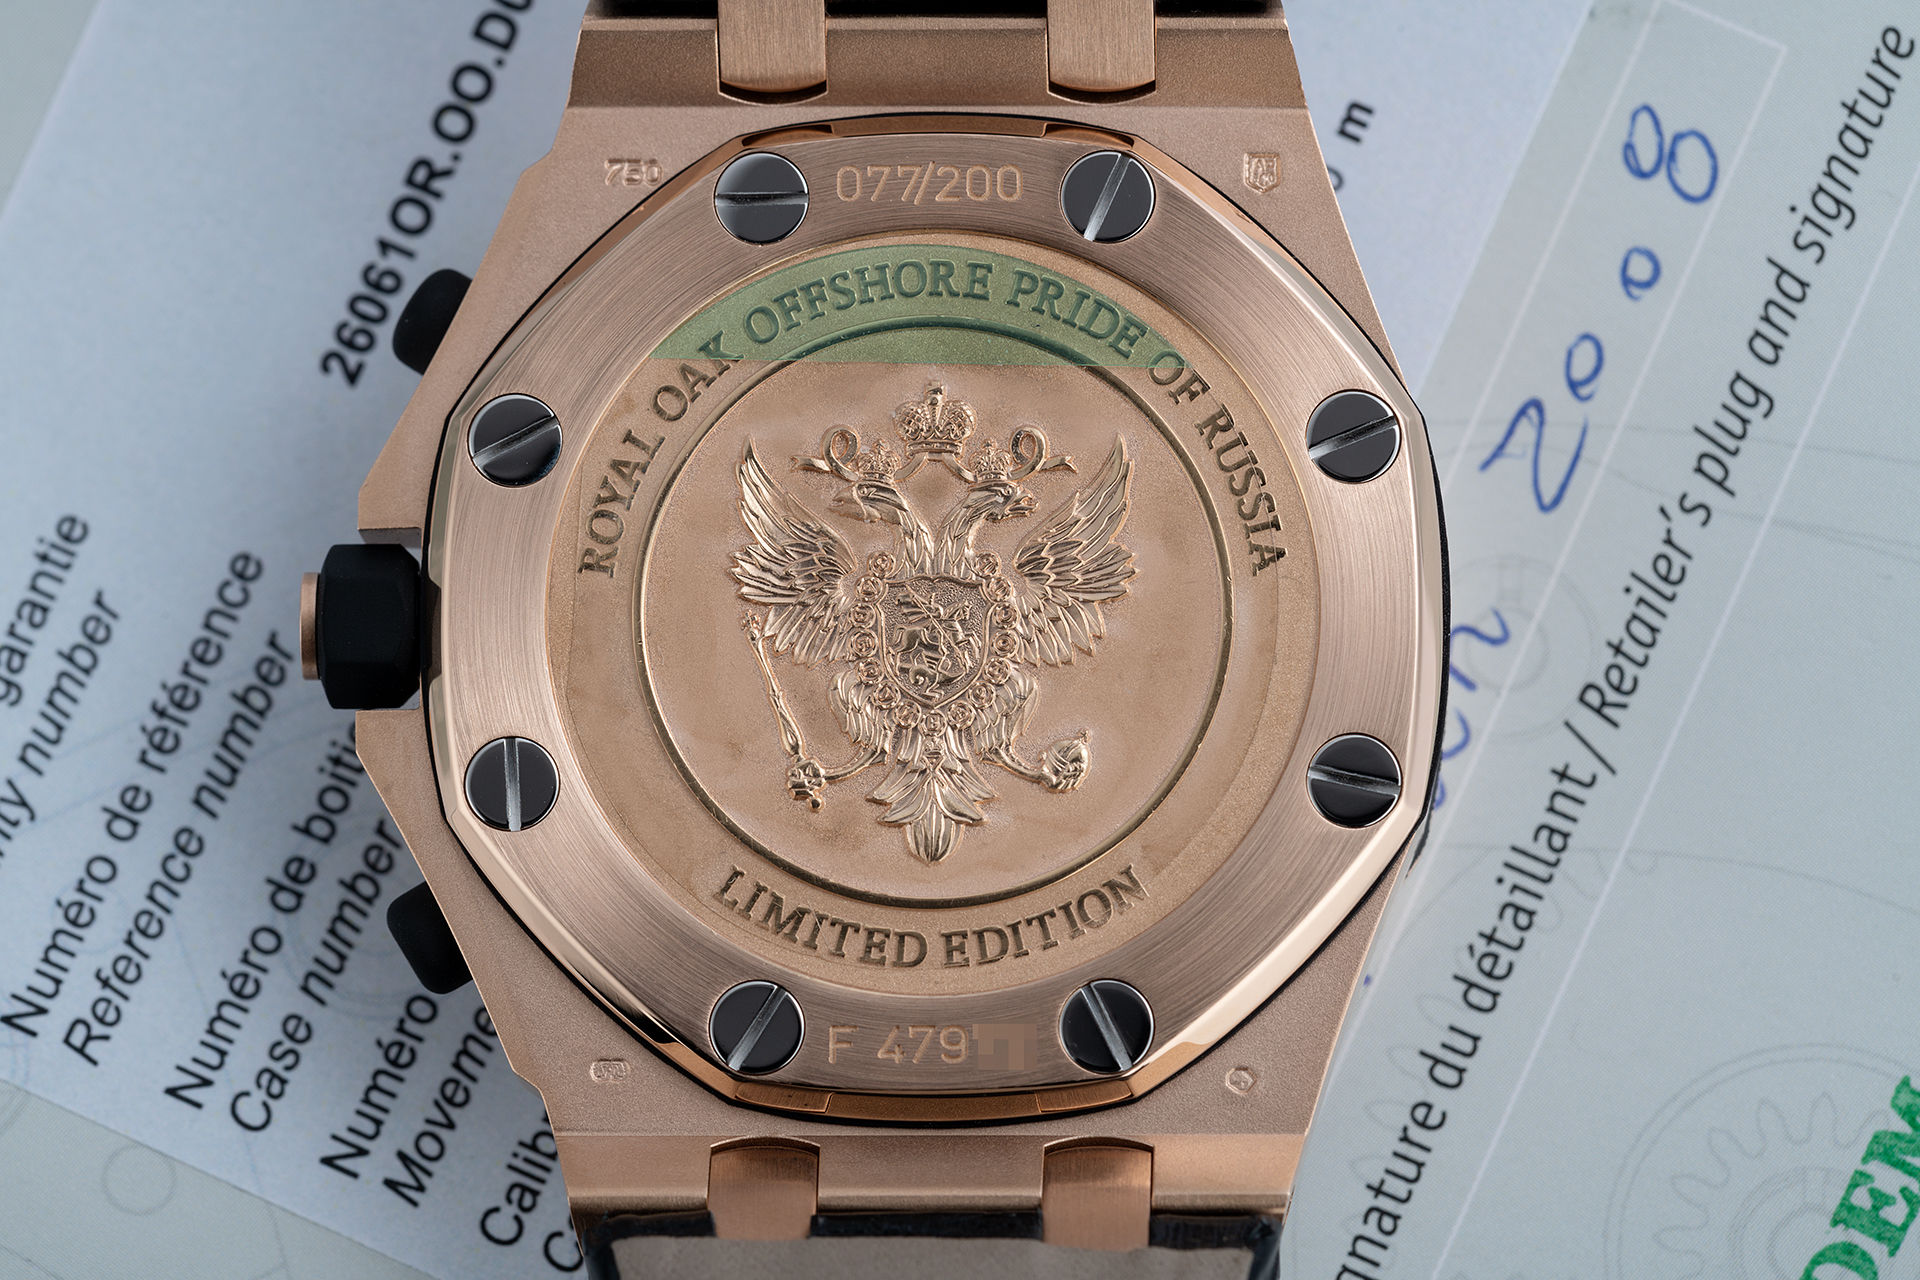 ref 26061OR.OO.D002CR.01 | Limited Edition 'One of 200' | Audemars Piguet Royal Oak Offshore